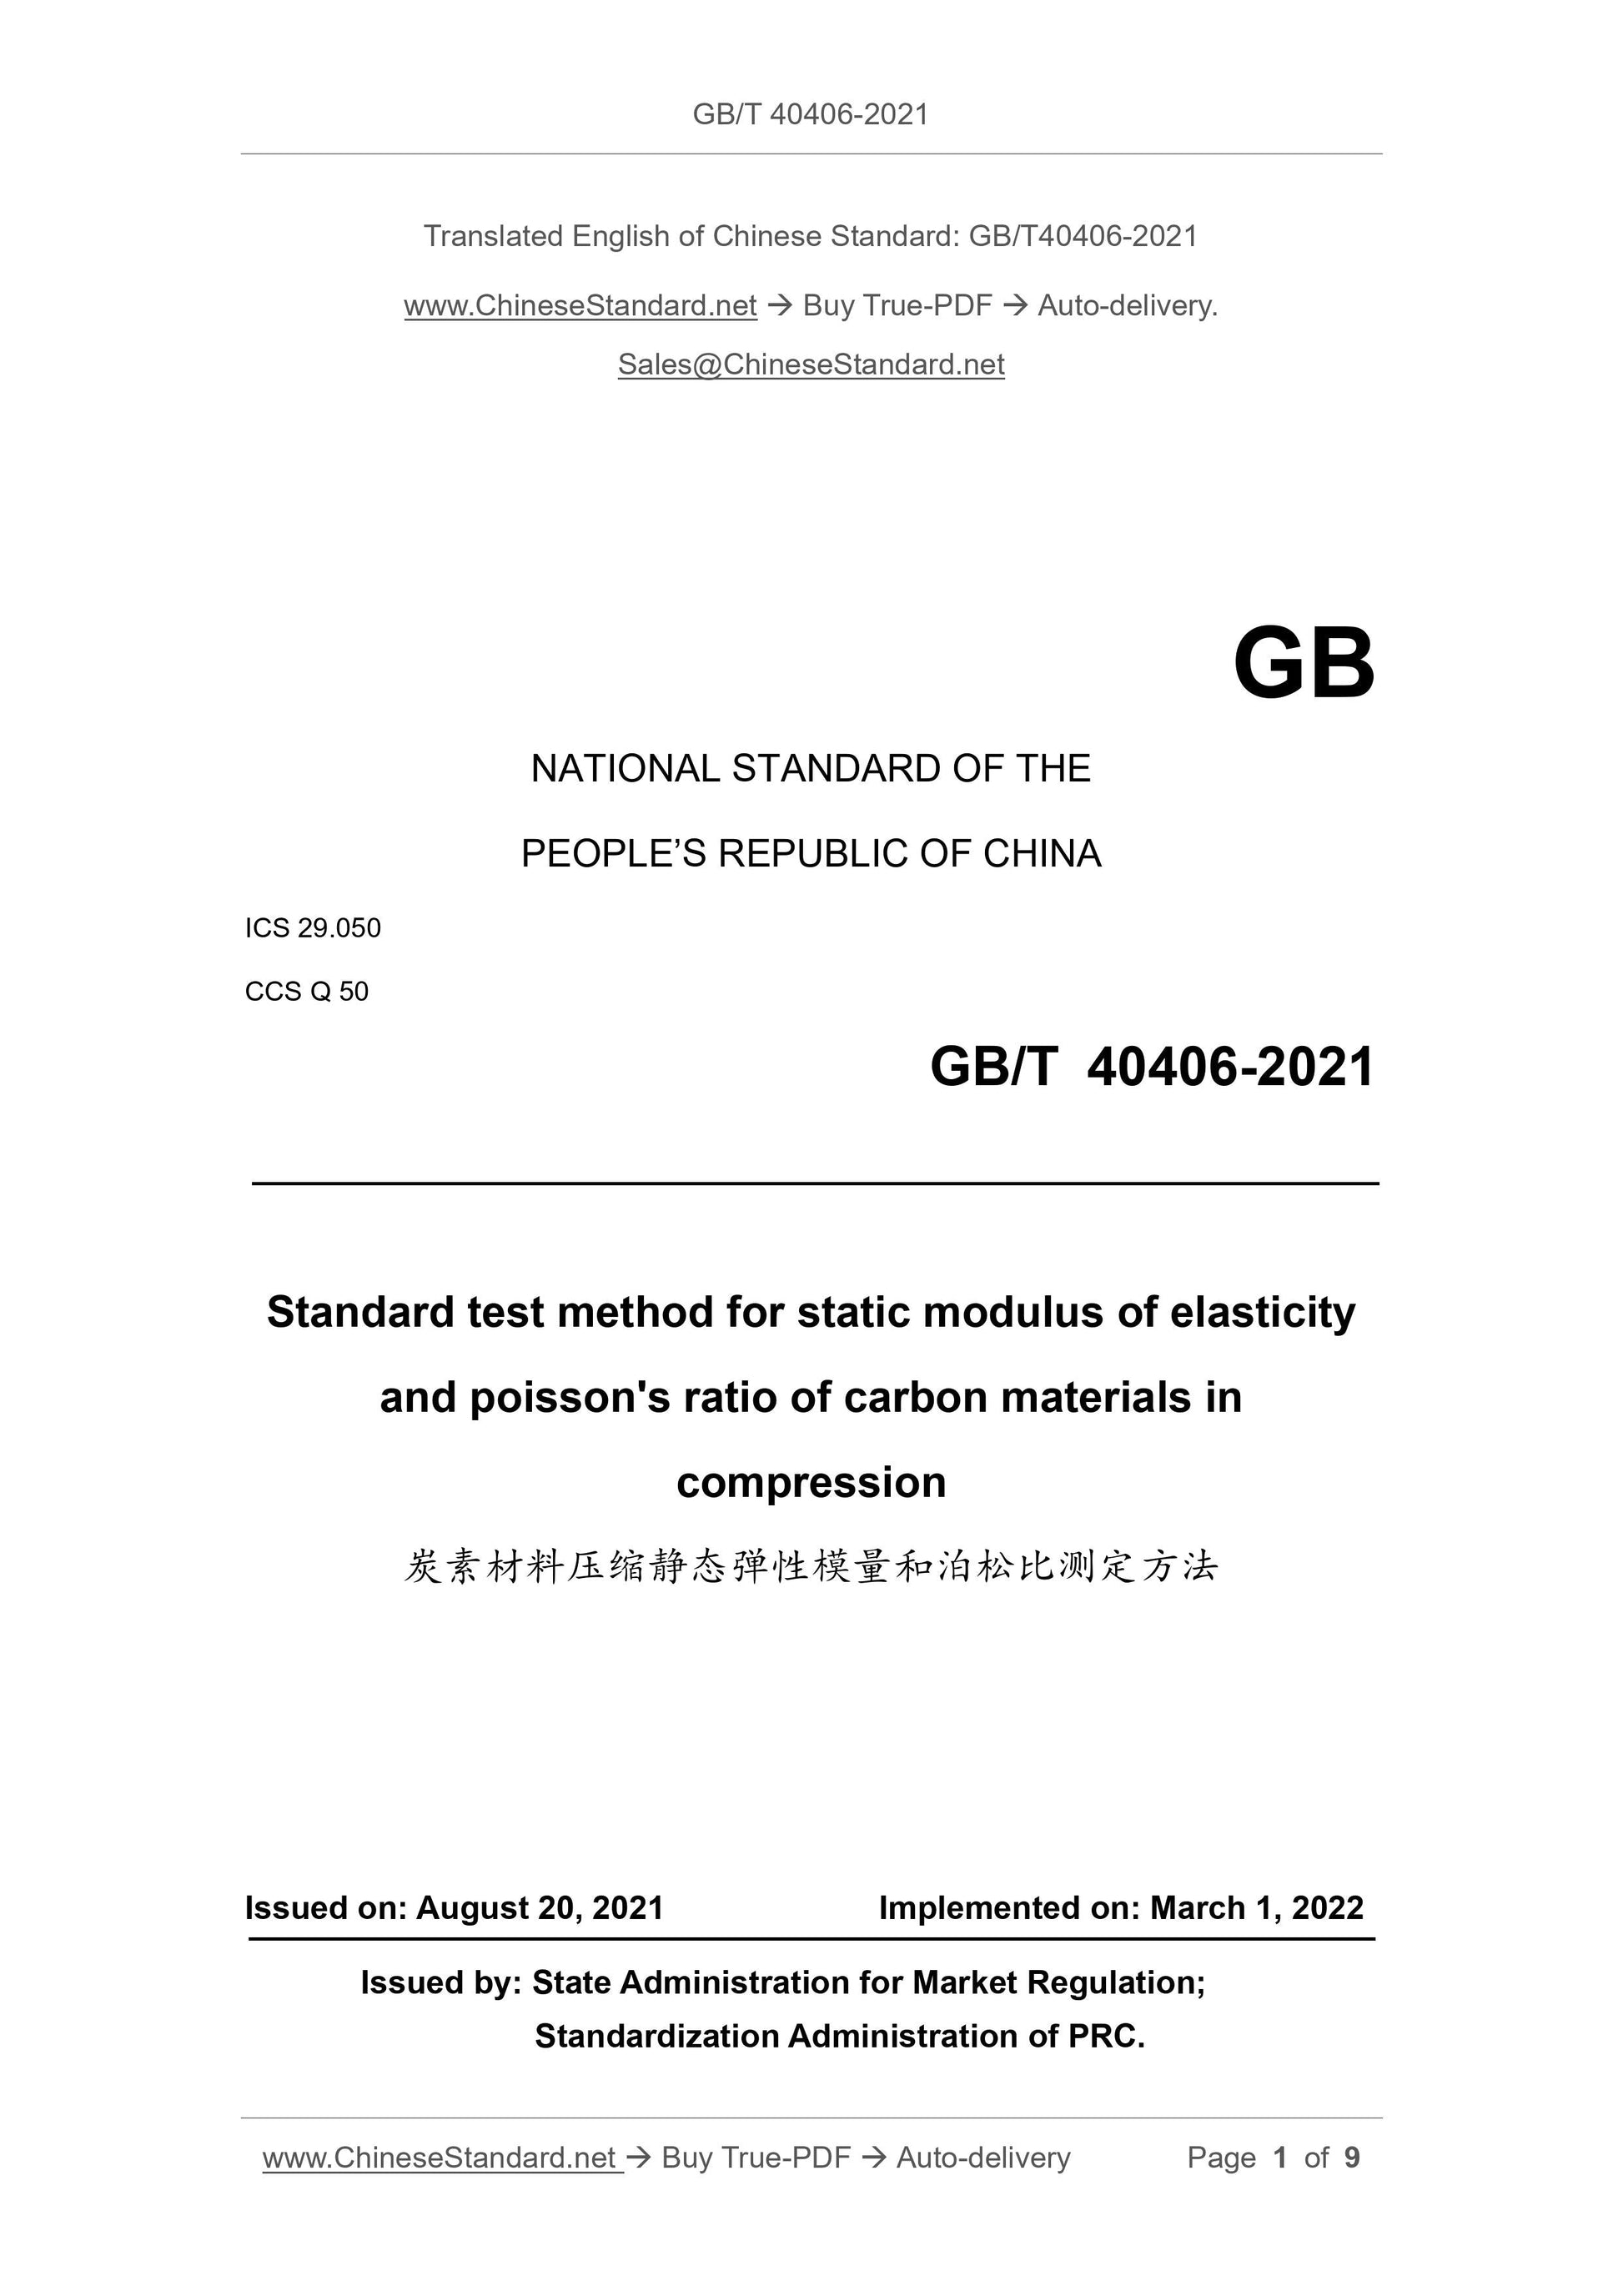 GB/T 40406-2021 Page 1